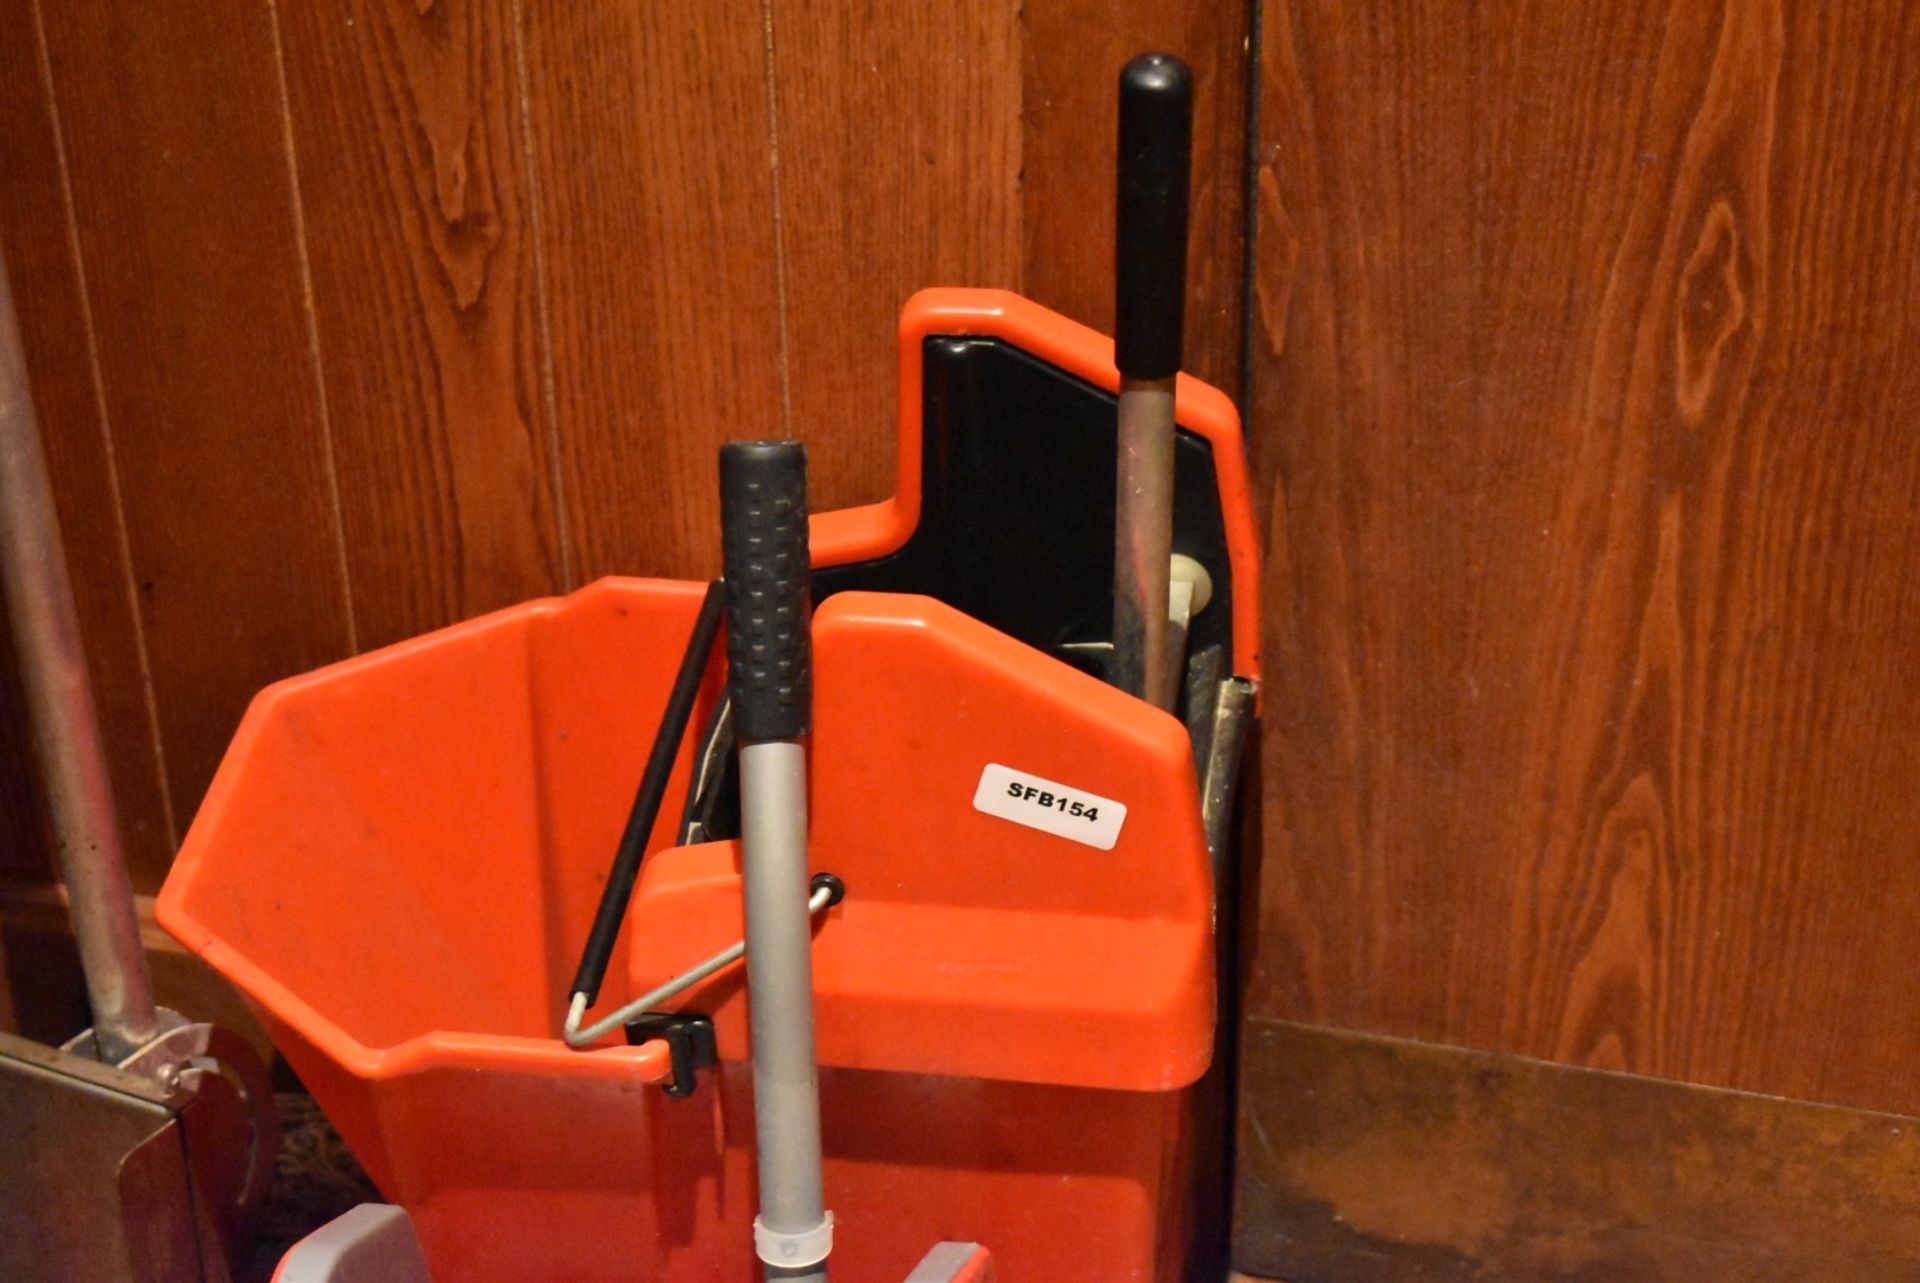 1 x Mop Bucket & Assorted Handles As Photographed - From a Popular Italian-American Diner - Image 2 of 3